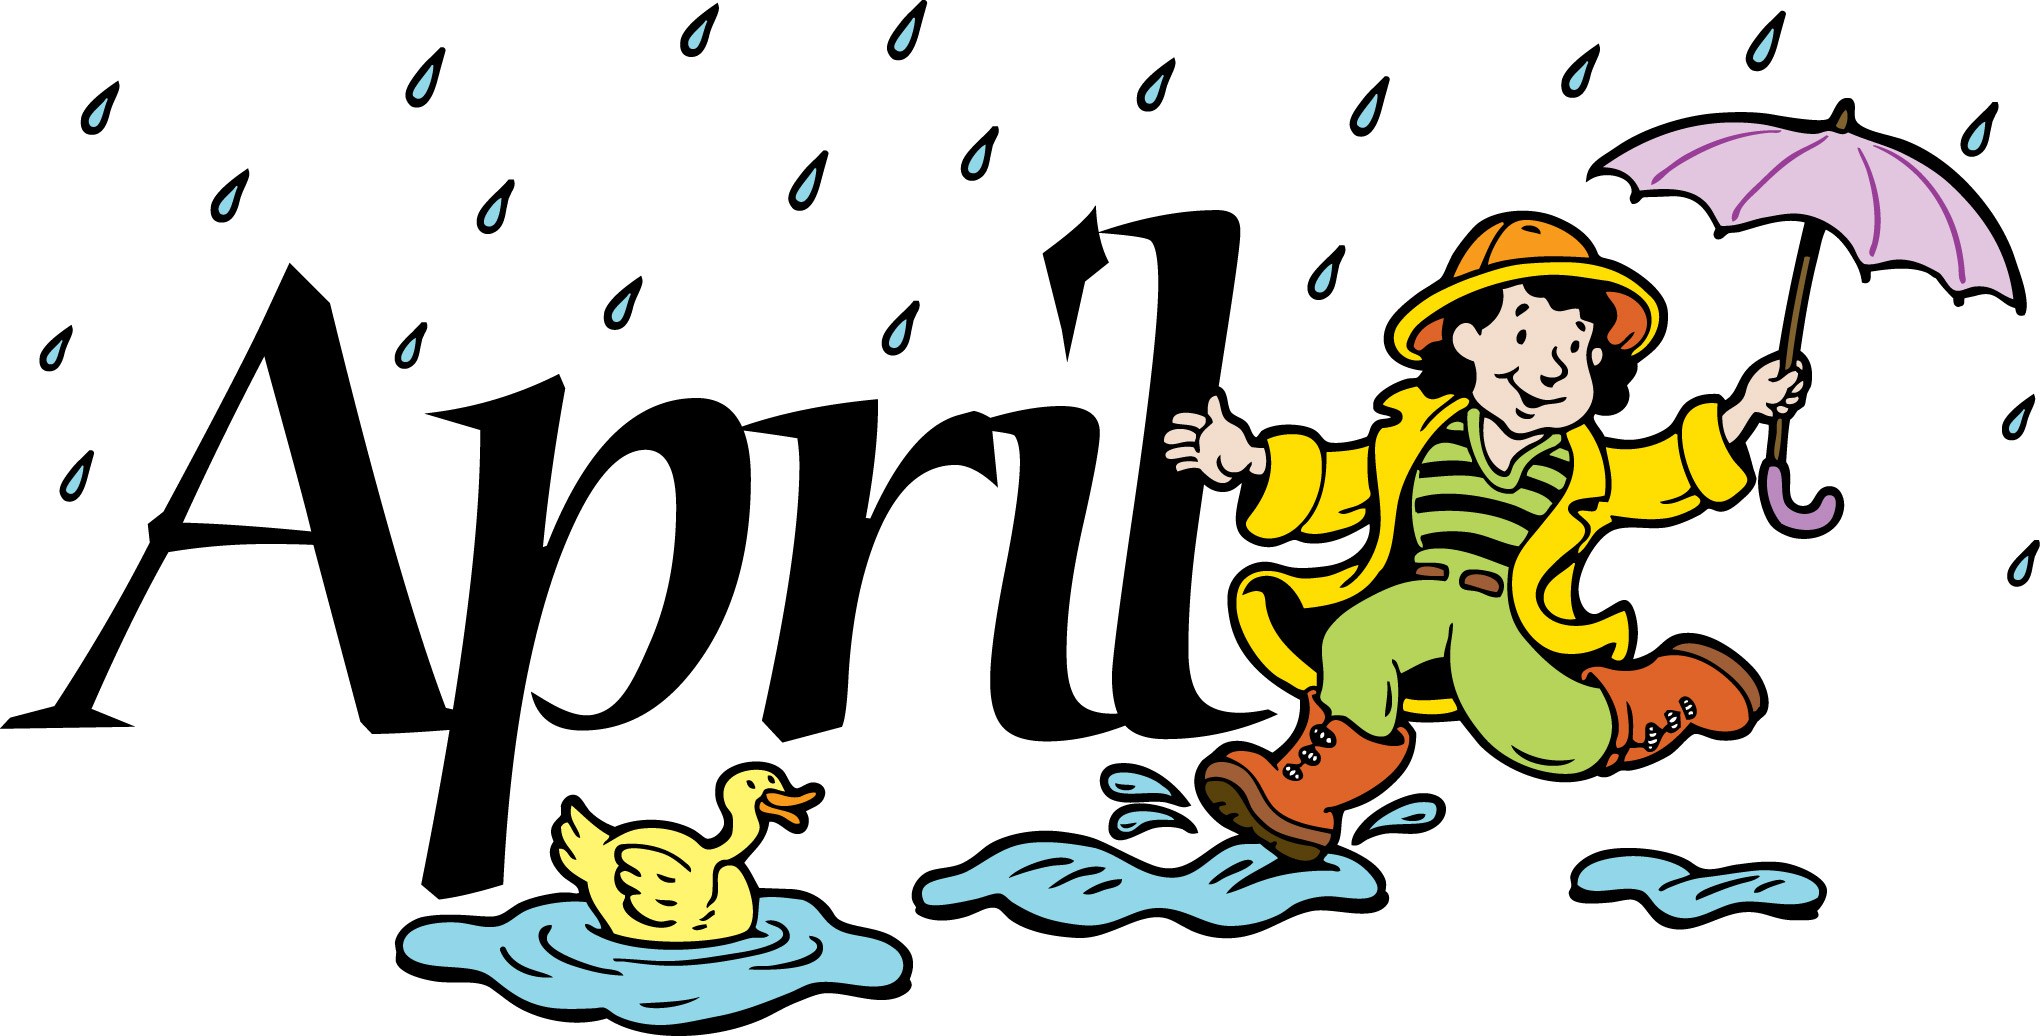 April 2013 Was Wetter Than Average Aprils - Months Of The Year April , HD Wallpaper & Backgrounds